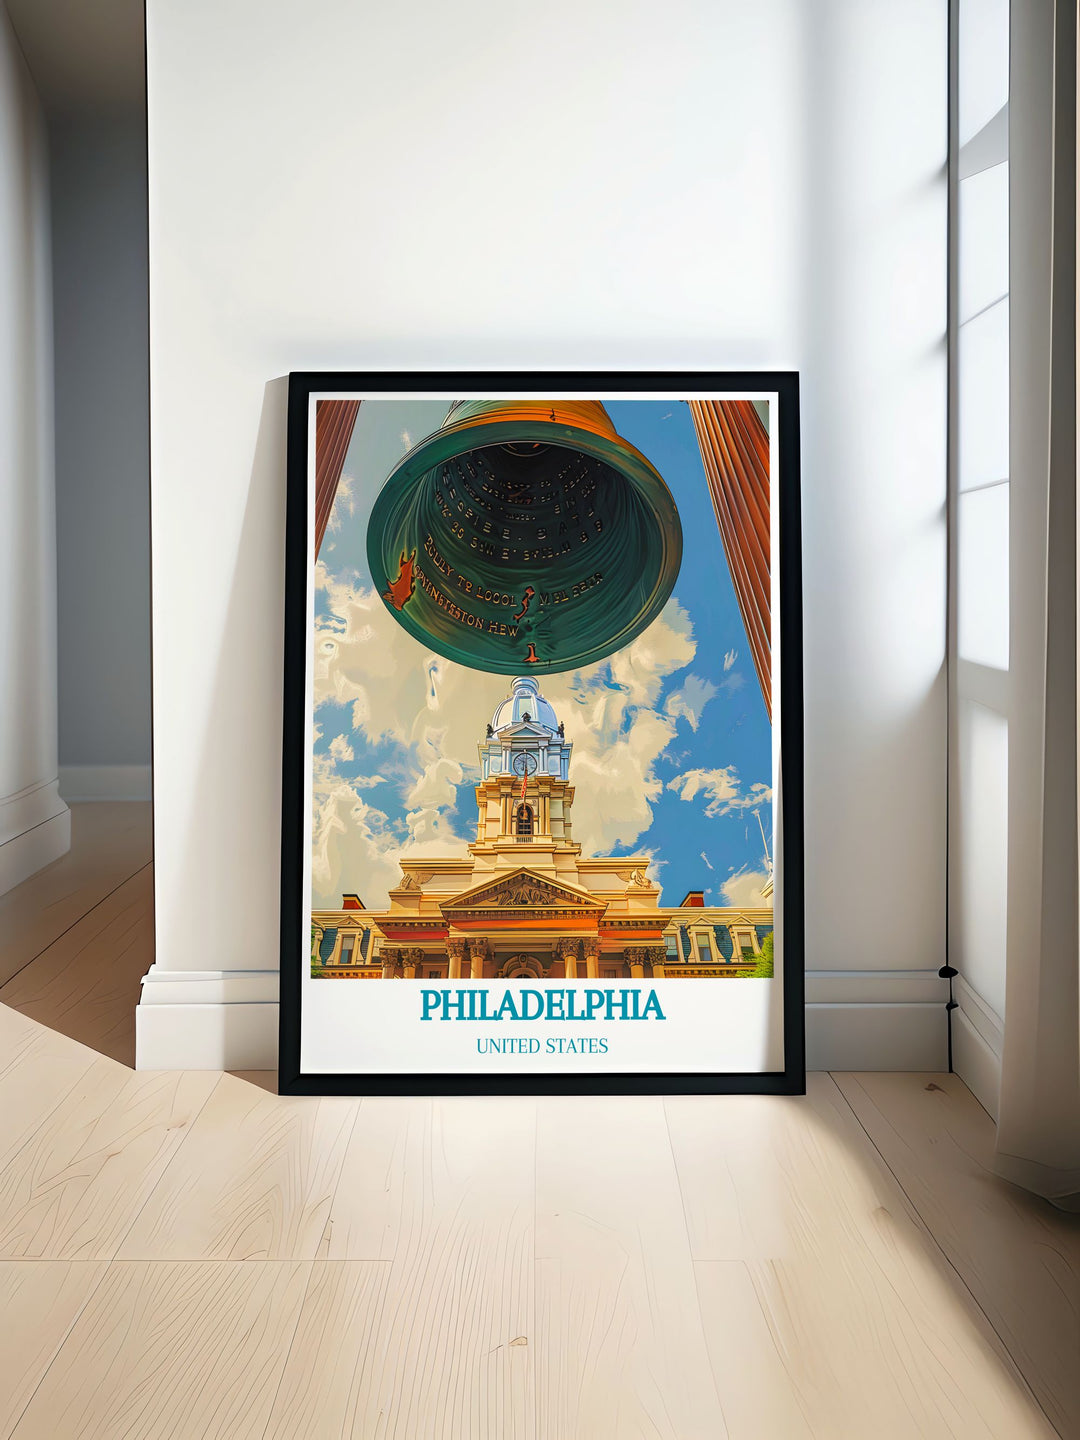 Reveal the cultural significance of the Liberty Bell with this travel poster, highlighting its importance in American history and its iconic status in Philadelphia.